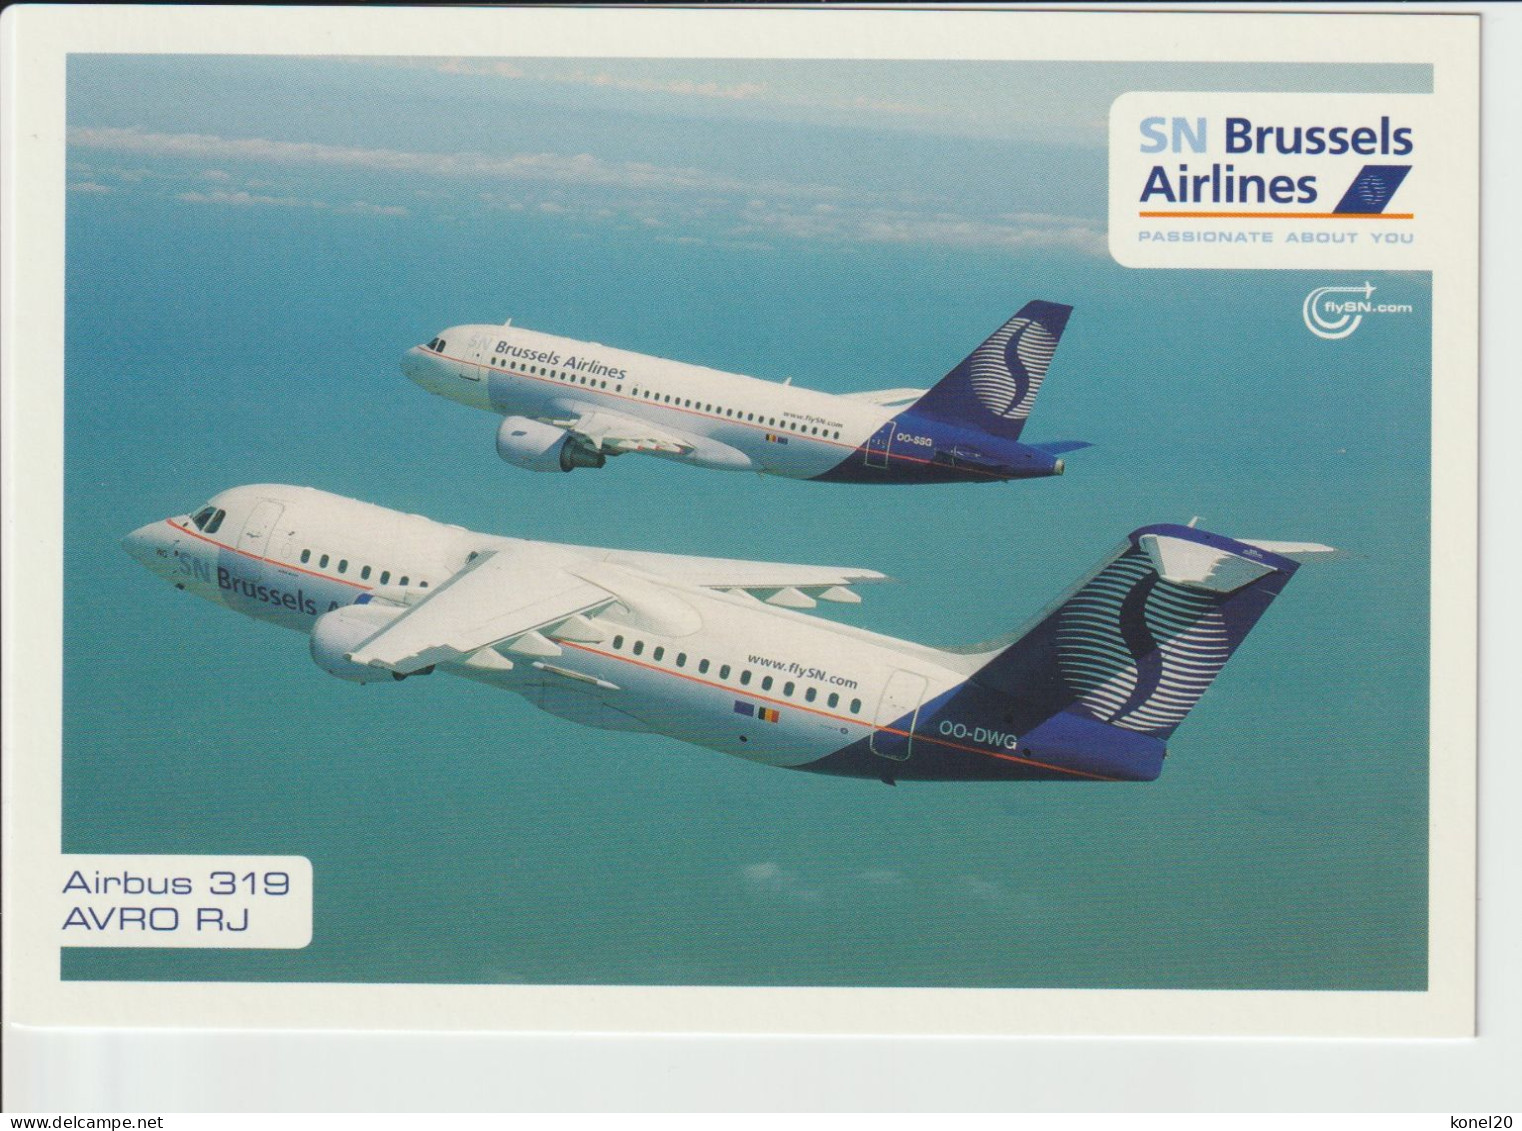 Promotioncard Brussels Airlines Airbus A319 & AVRO RJ Aircraft - 1919-1938: Between Wars